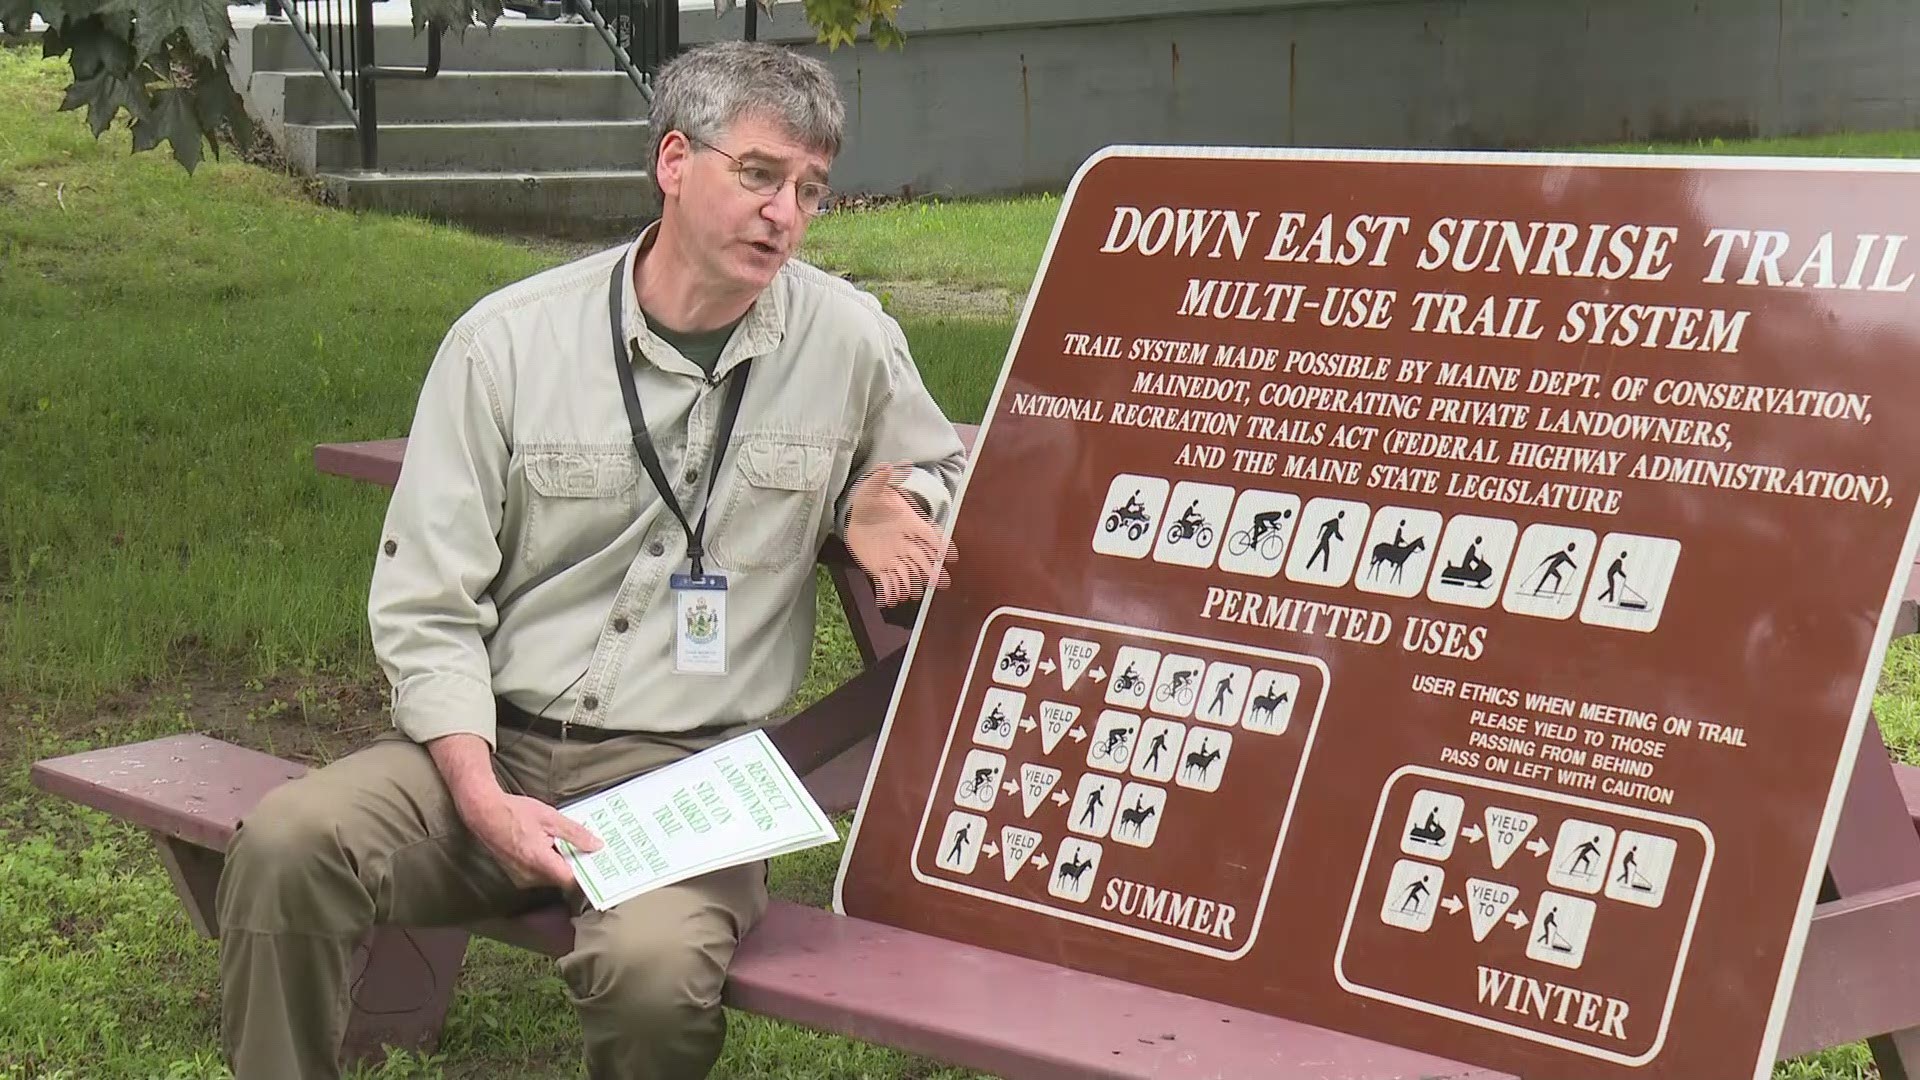 Brian Bronson, the supervisor of the ATV program Maine Bureau of Parks and Lands explains m,ulti-use signs in State Parks.